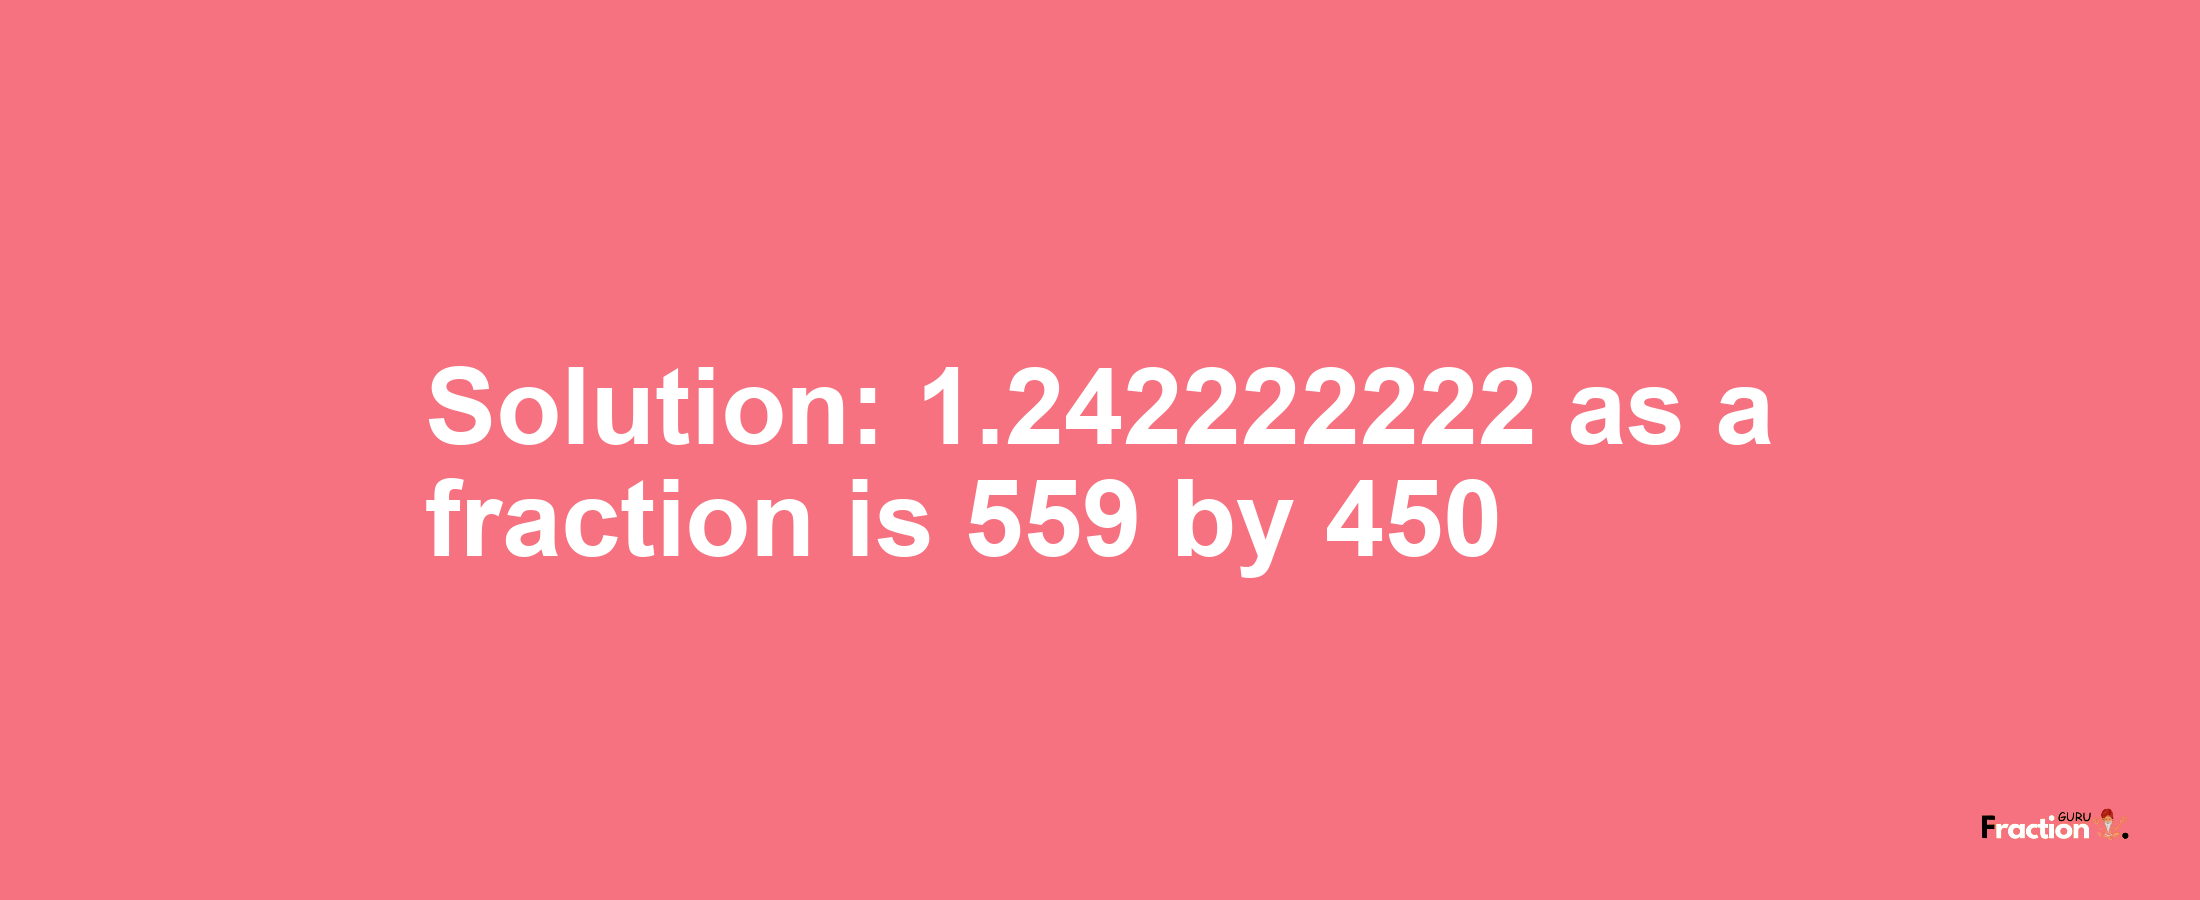 Solution:1.242222222 as a fraction is 559/450